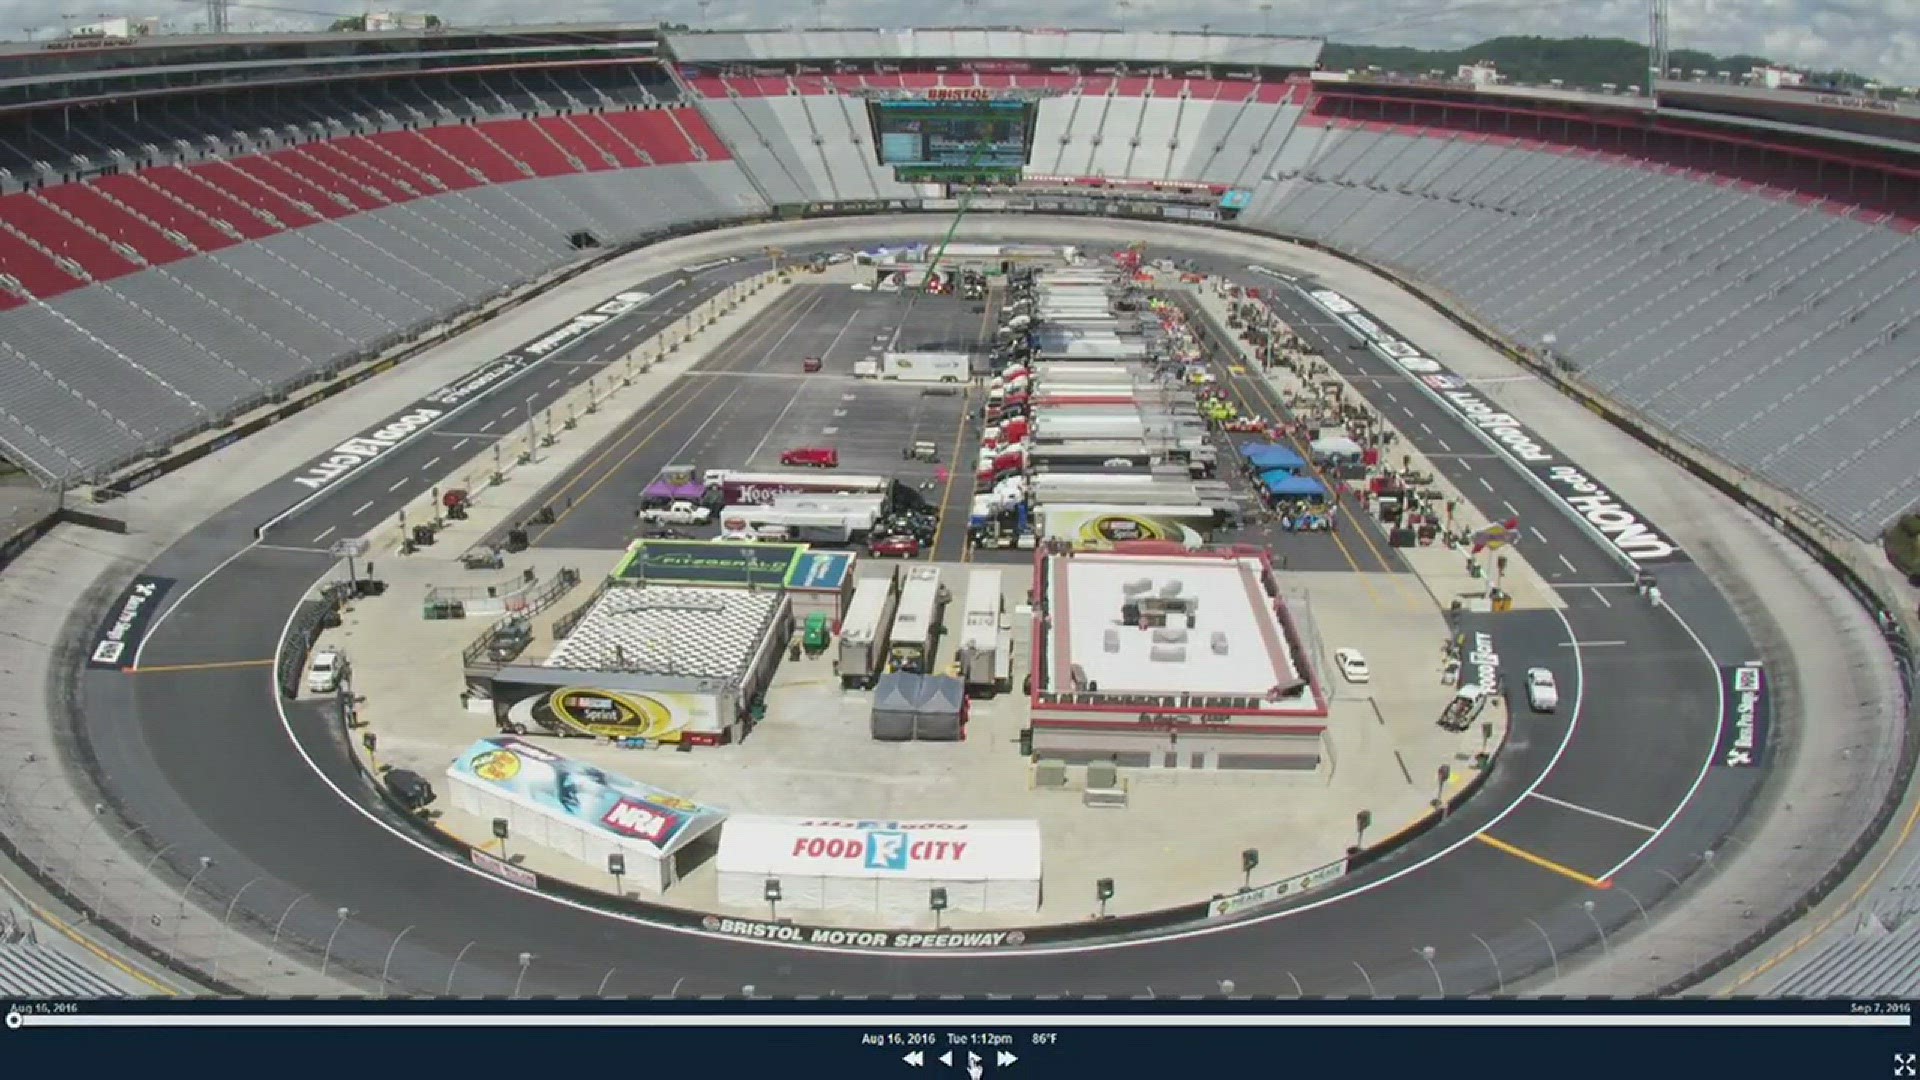 Watch as workers transform the race track into the football field for the Vols' Battle at Bristol with Virginia Tech.